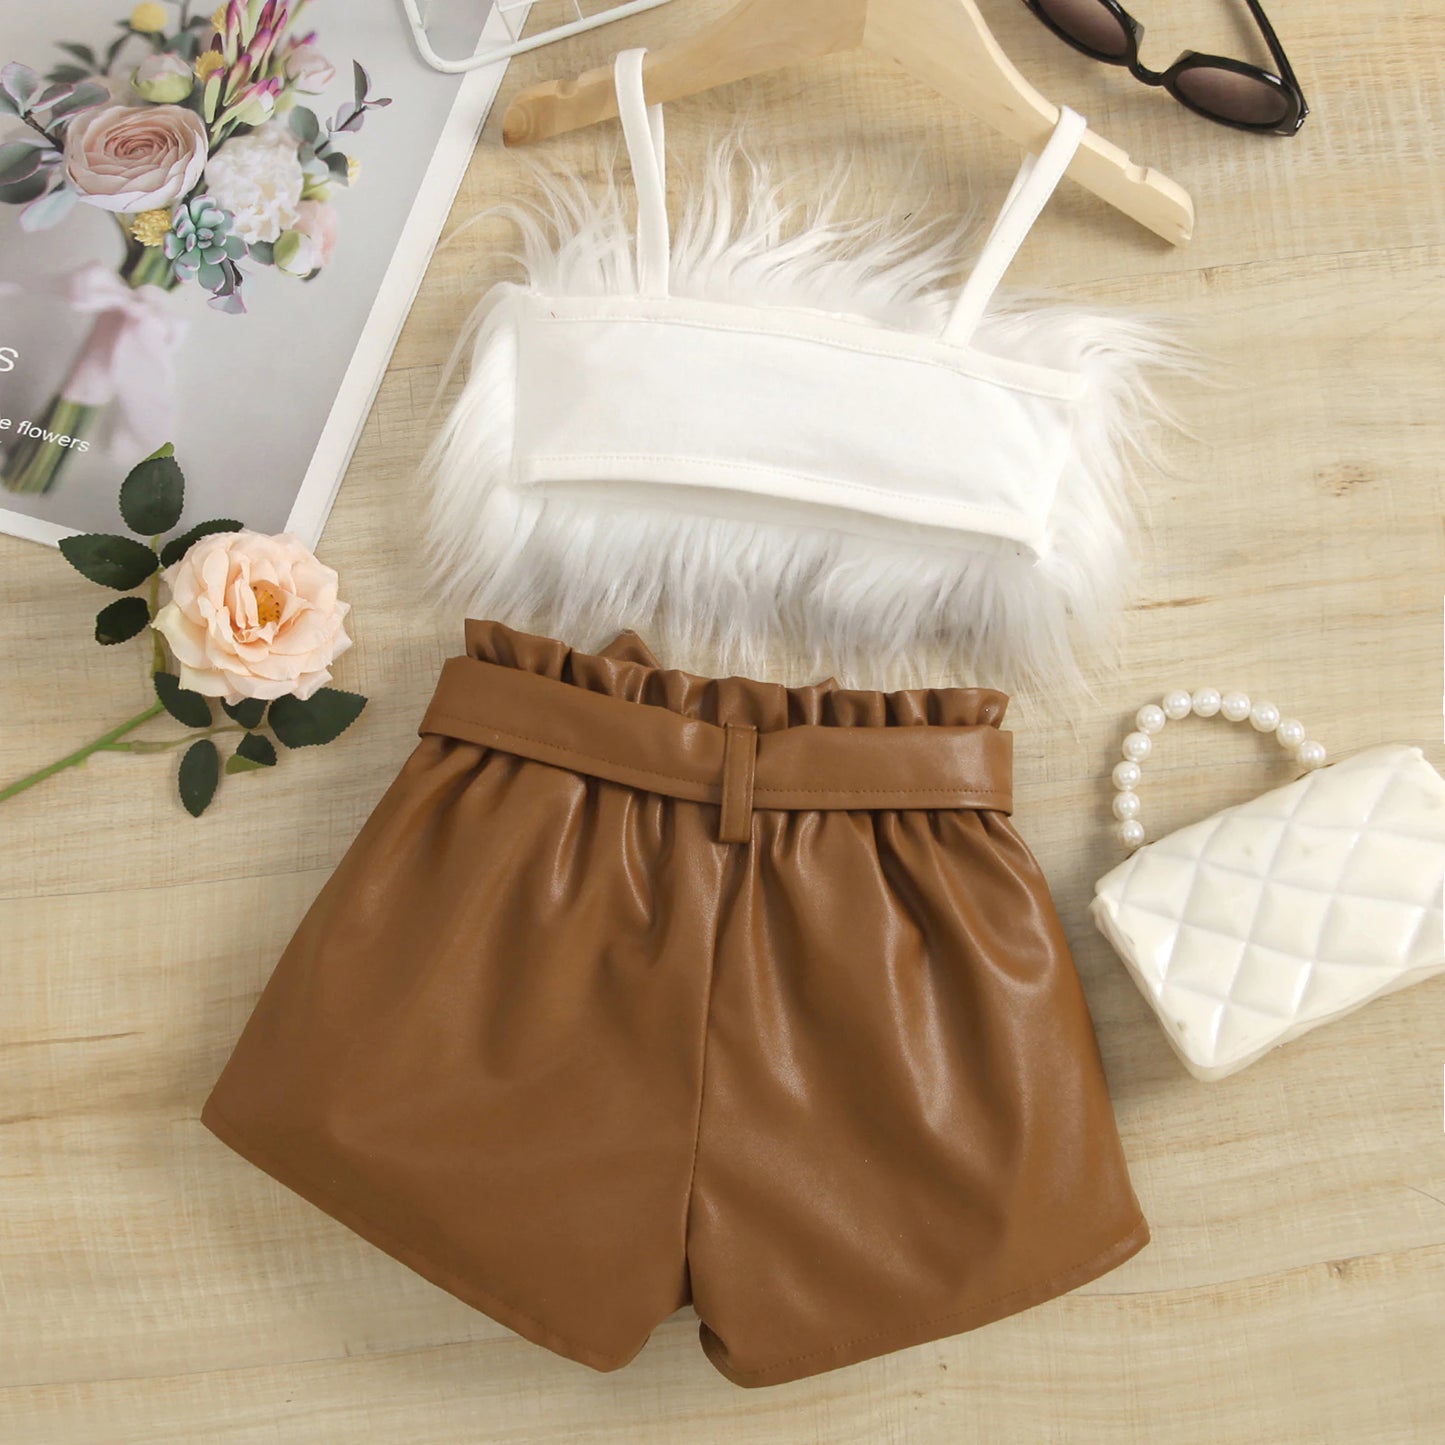 Exclusive Brown Leather Skirt Dress